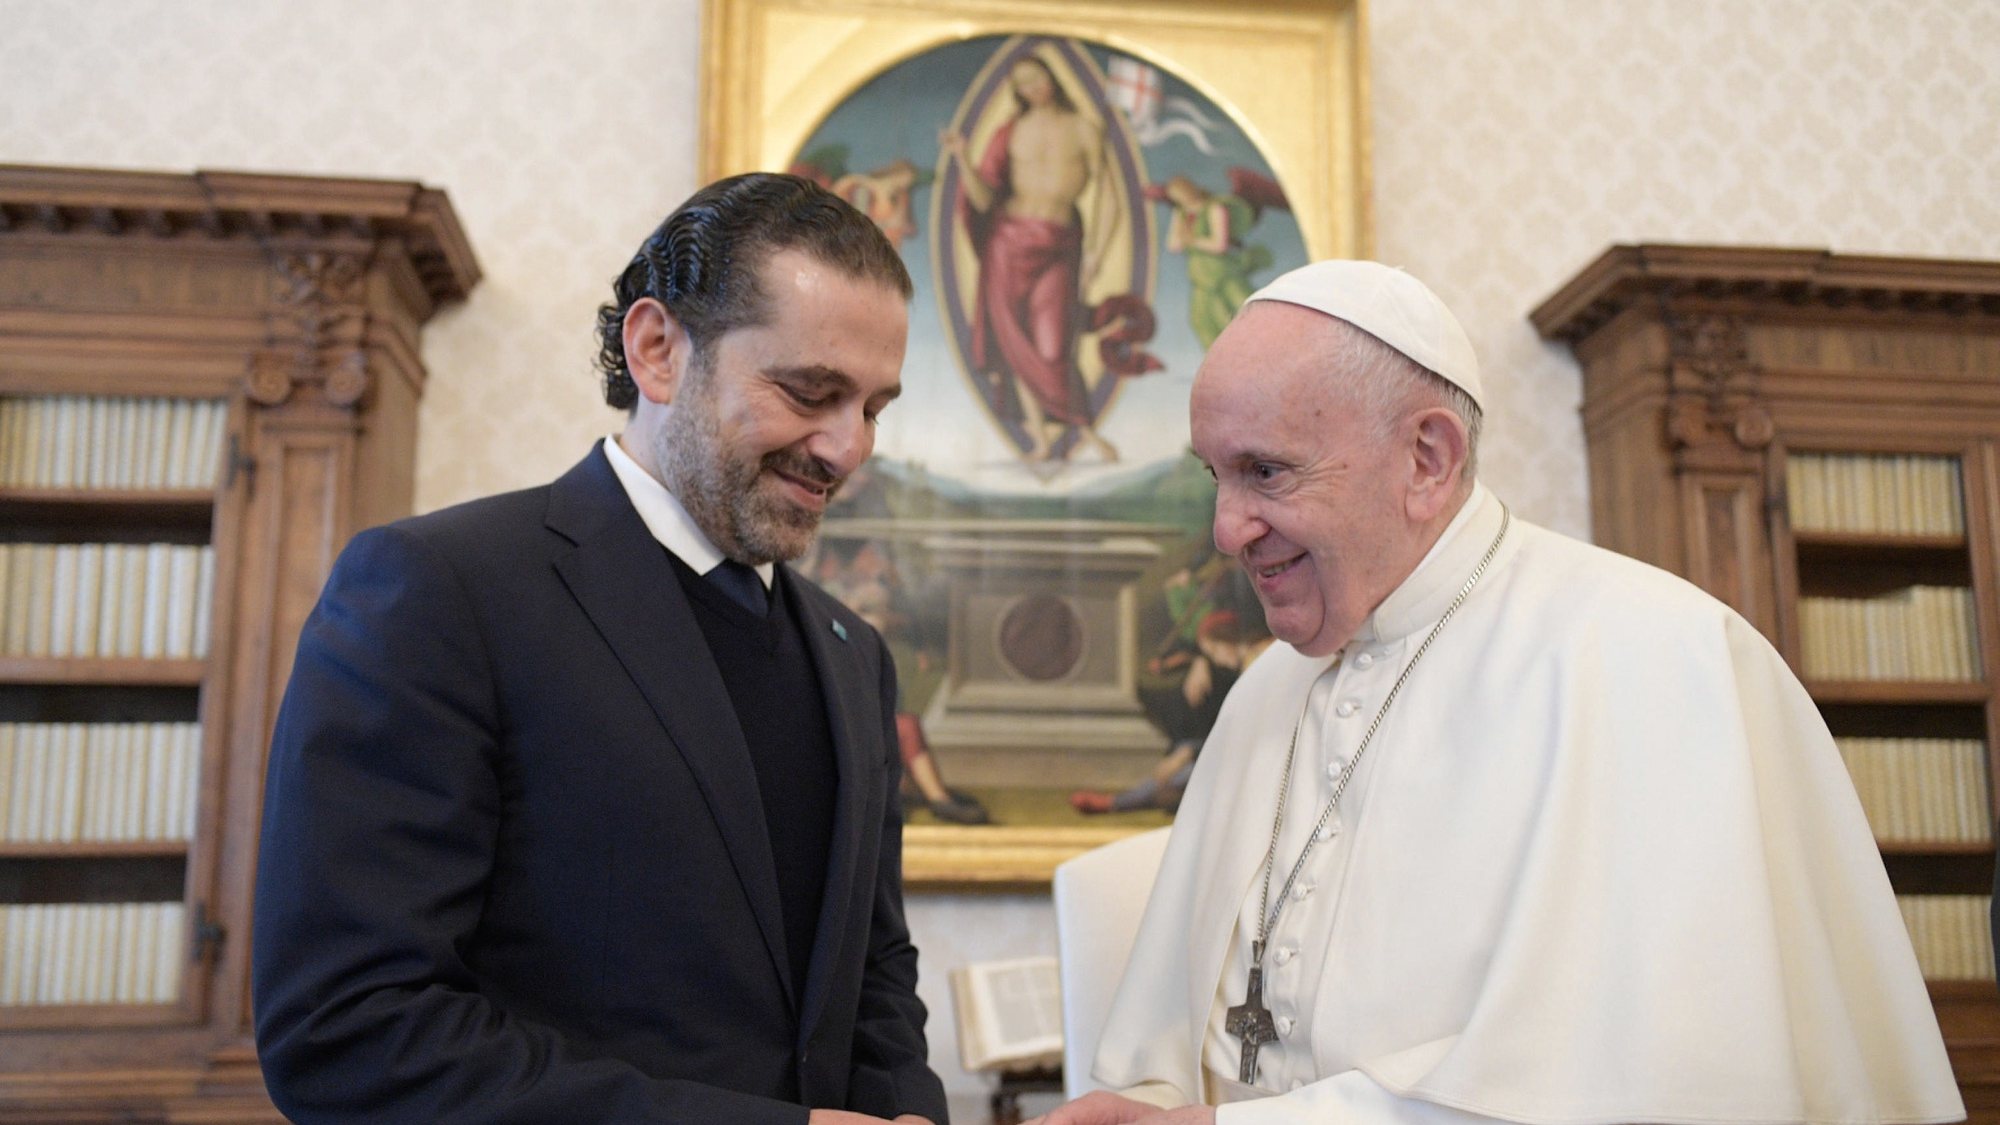 epa09152267 A handout picture provided by the Vatican Media shows Pope Francis receiving the Prime Minister designate of Lebanon, Saad Hariri (L), during a private audience at the Vatican, 22 April 2021.  EPA/VATICAN MEDIA HANDOUT  HANDOUT EDITORIAL USE ONLY/NO SALES